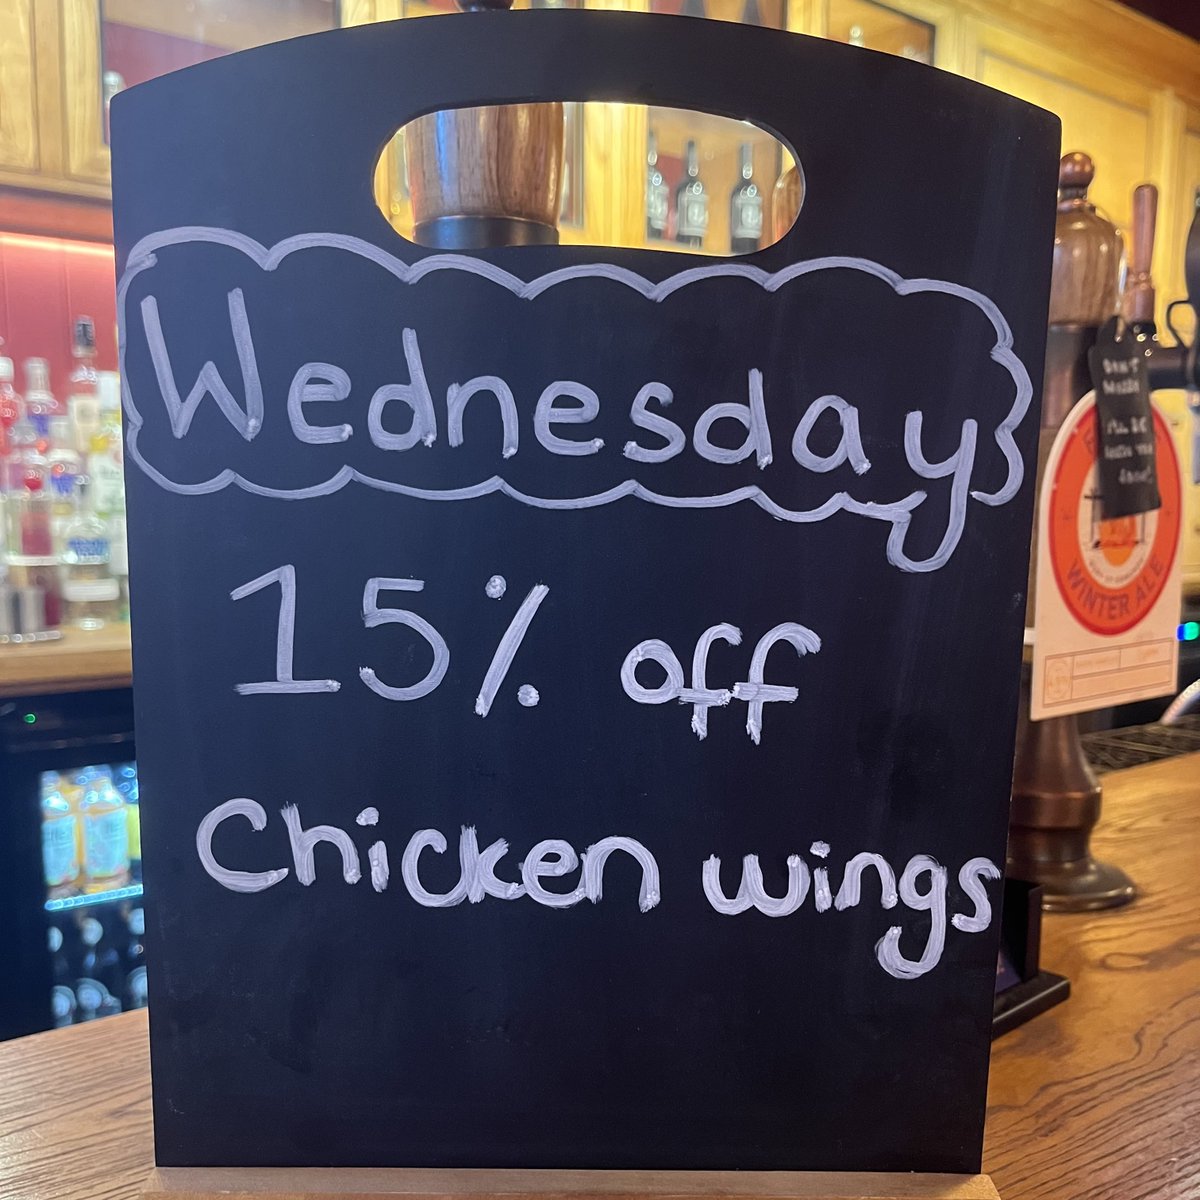 Wings Wednesdays are back but with a slight twist! 15% off wings! You can even choose between hot sauce or bbq sauce! EVERY WEDNESDAY! #greeneking #london #wingswednesday #deals #teddington